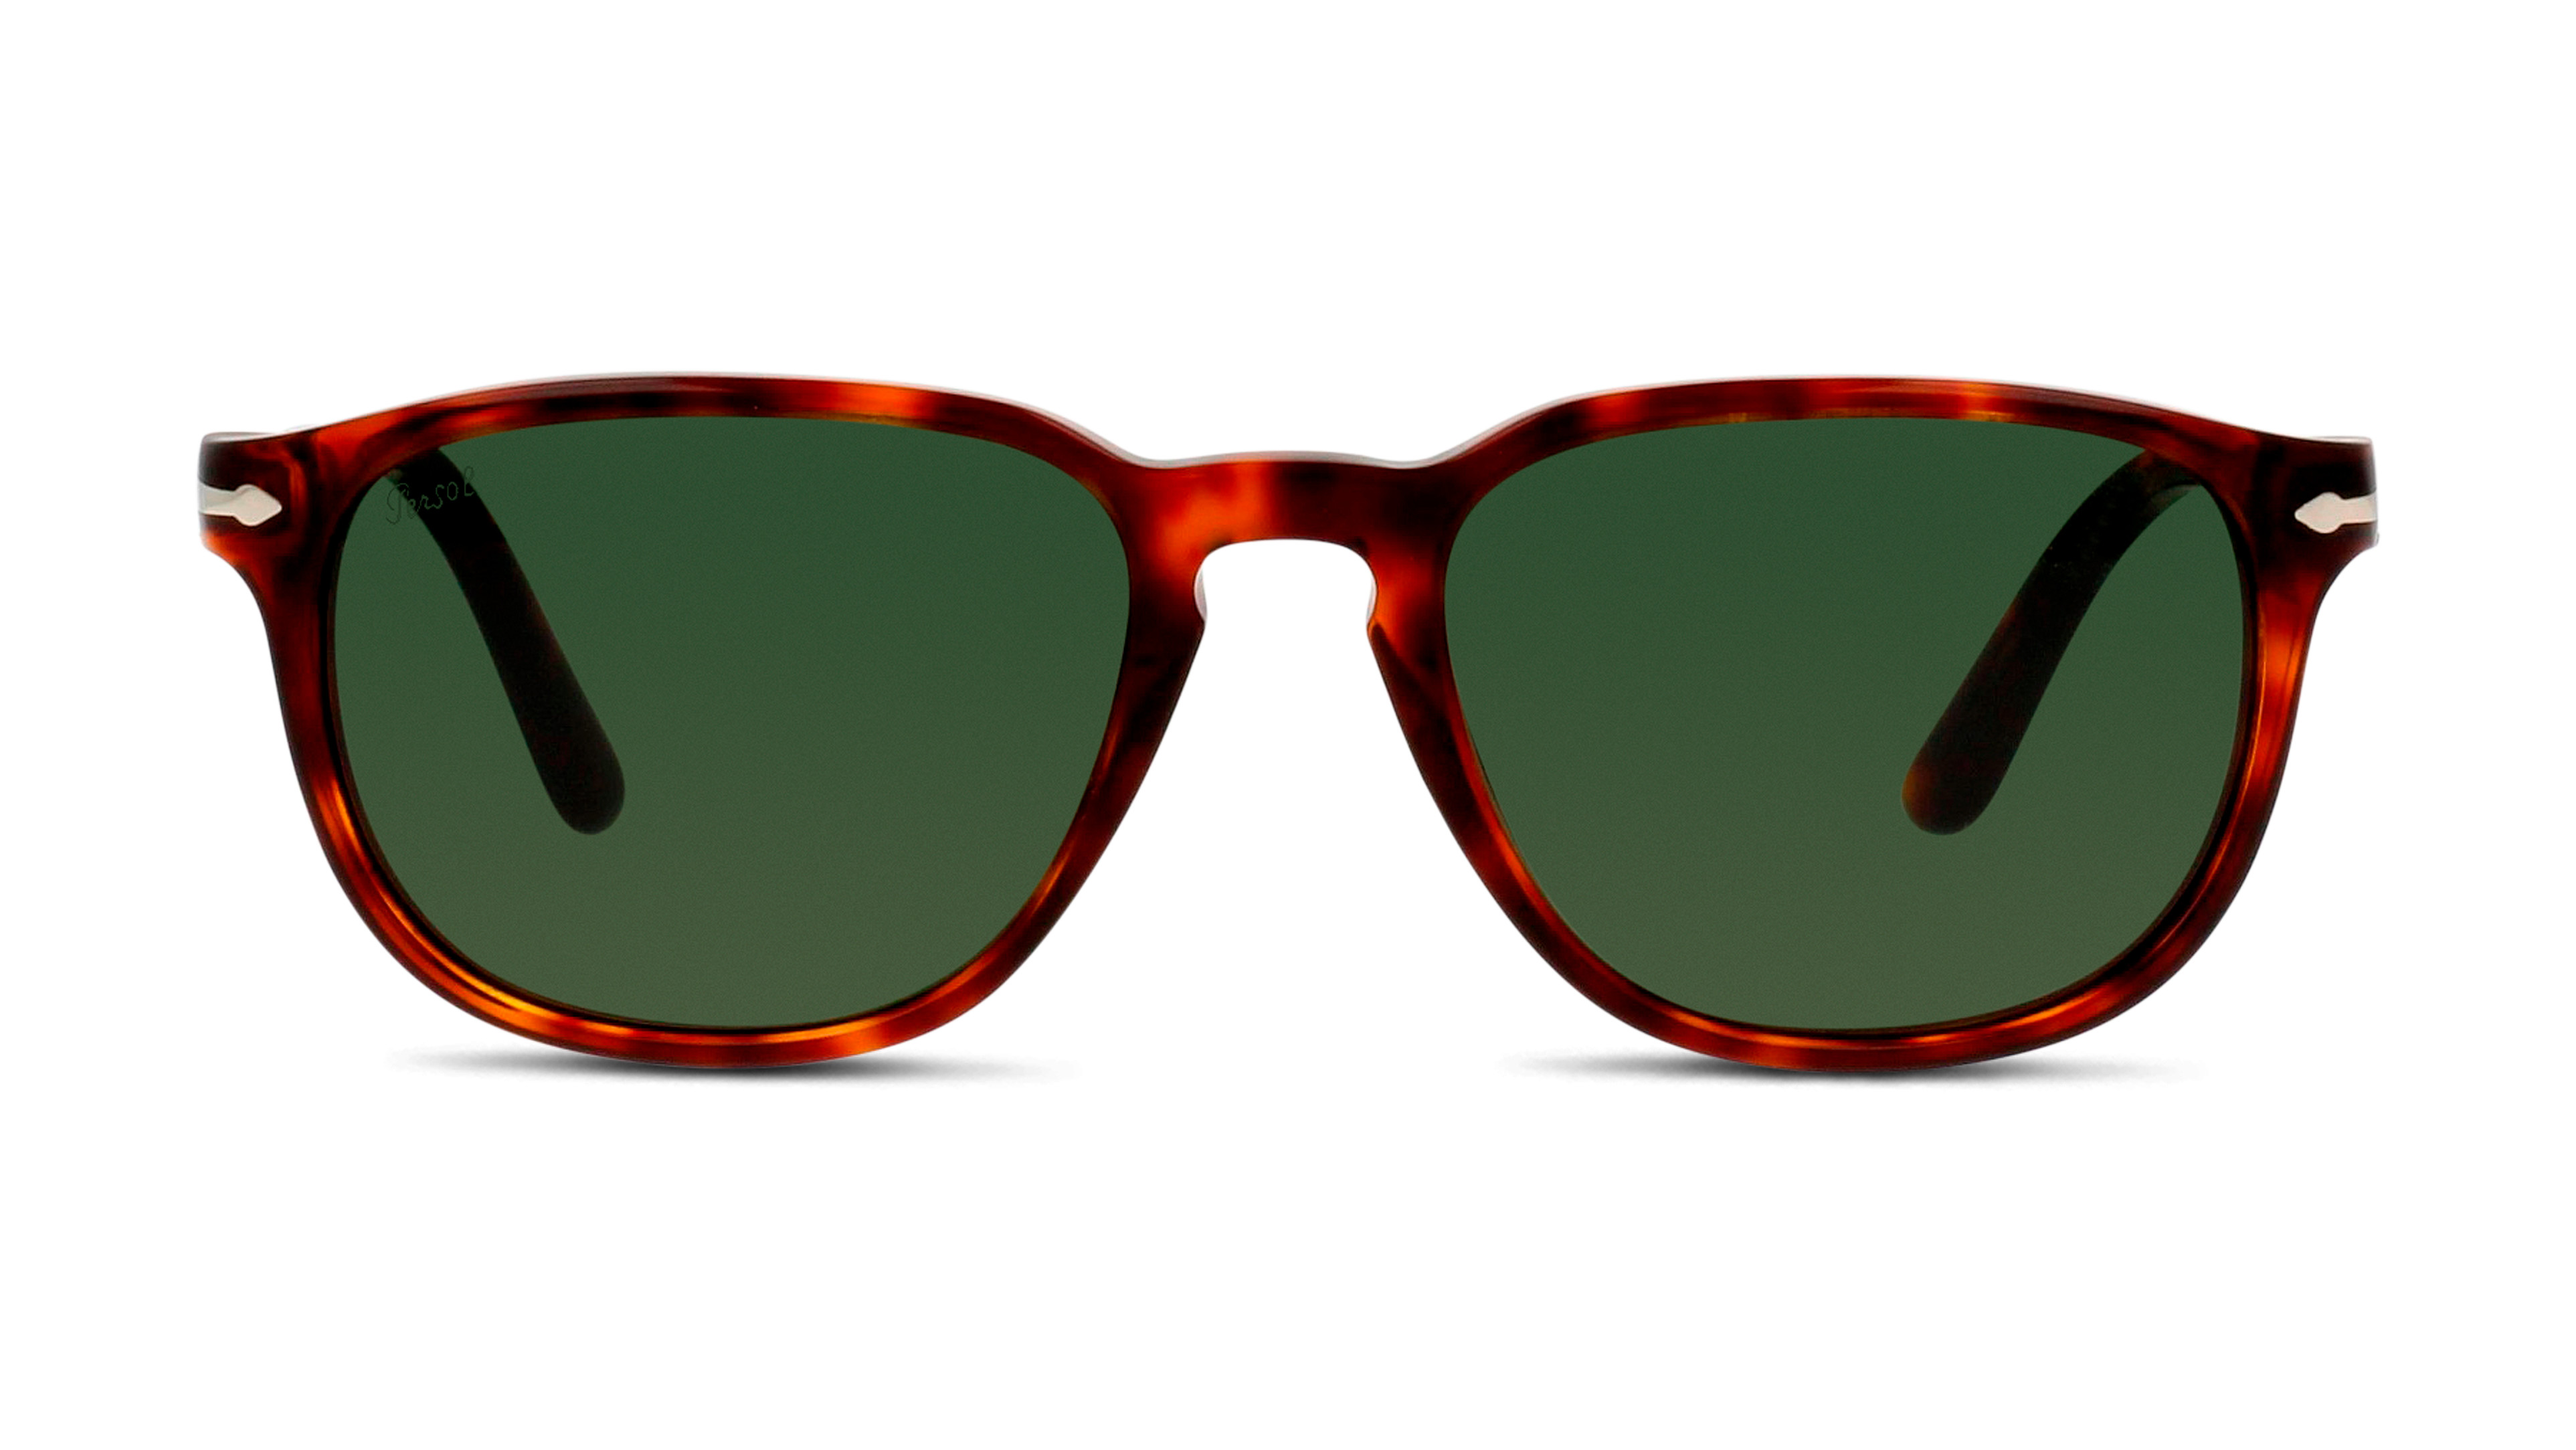 [products.image.front] Persol 0PO3019S 24/31 Sonnenbrille